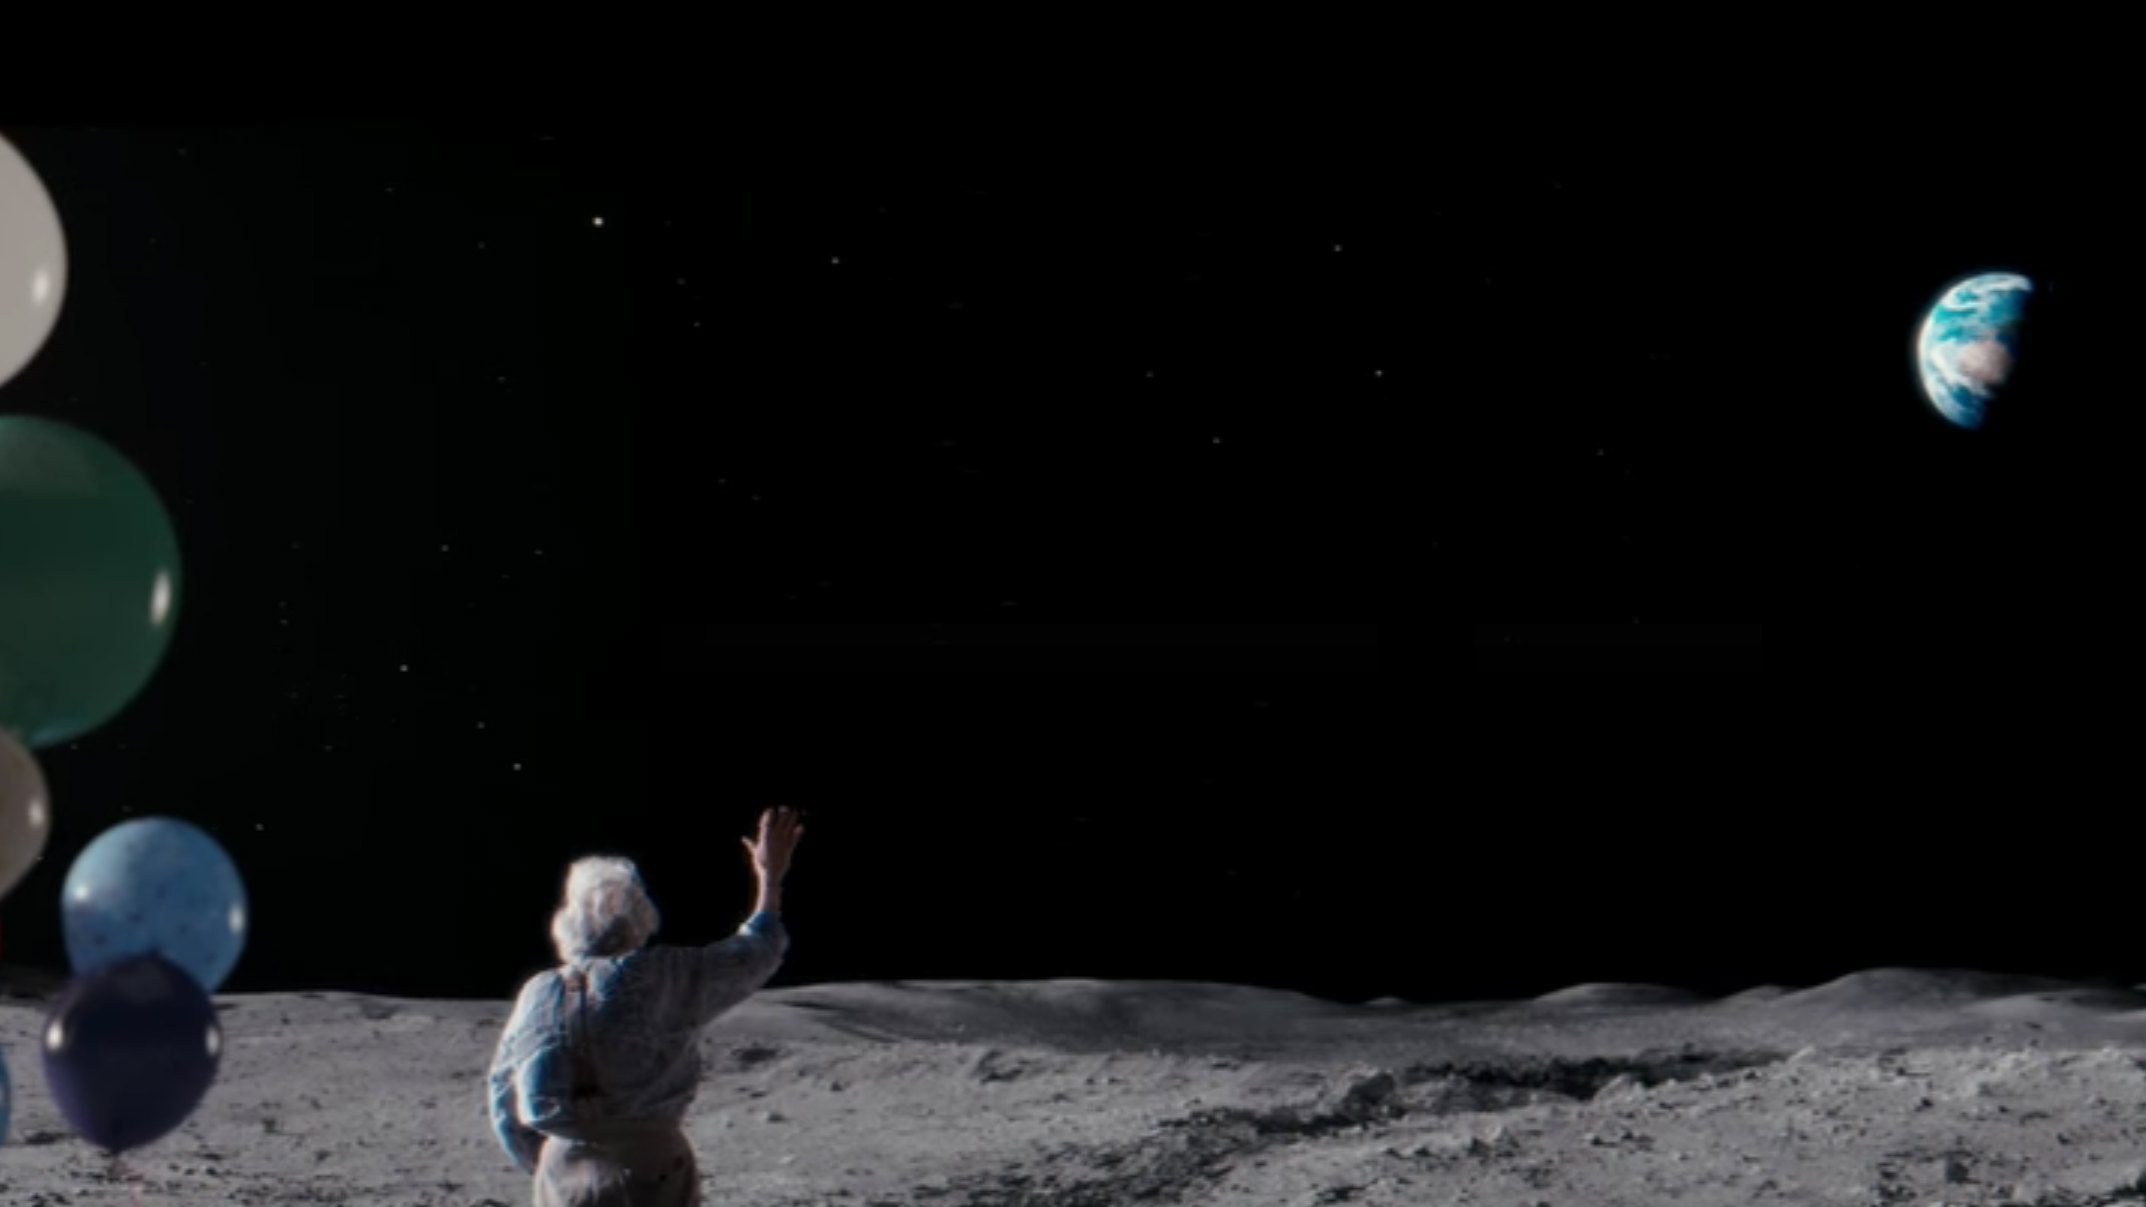 Webhits: A Christmas surprise on the moon